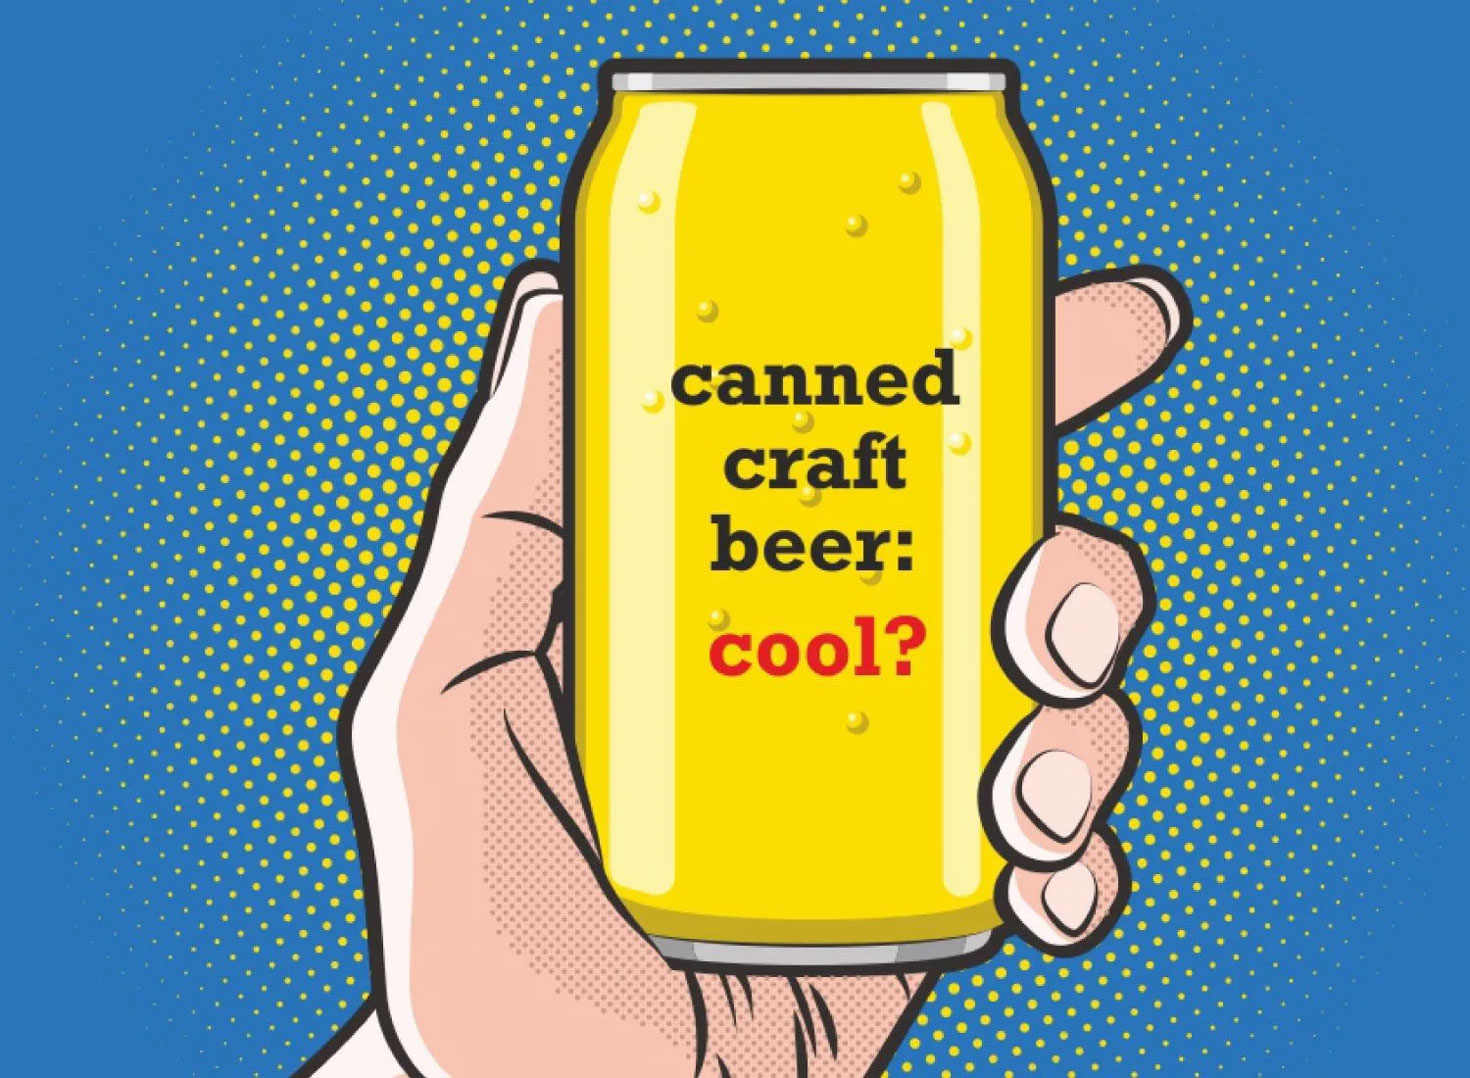 Canned craft